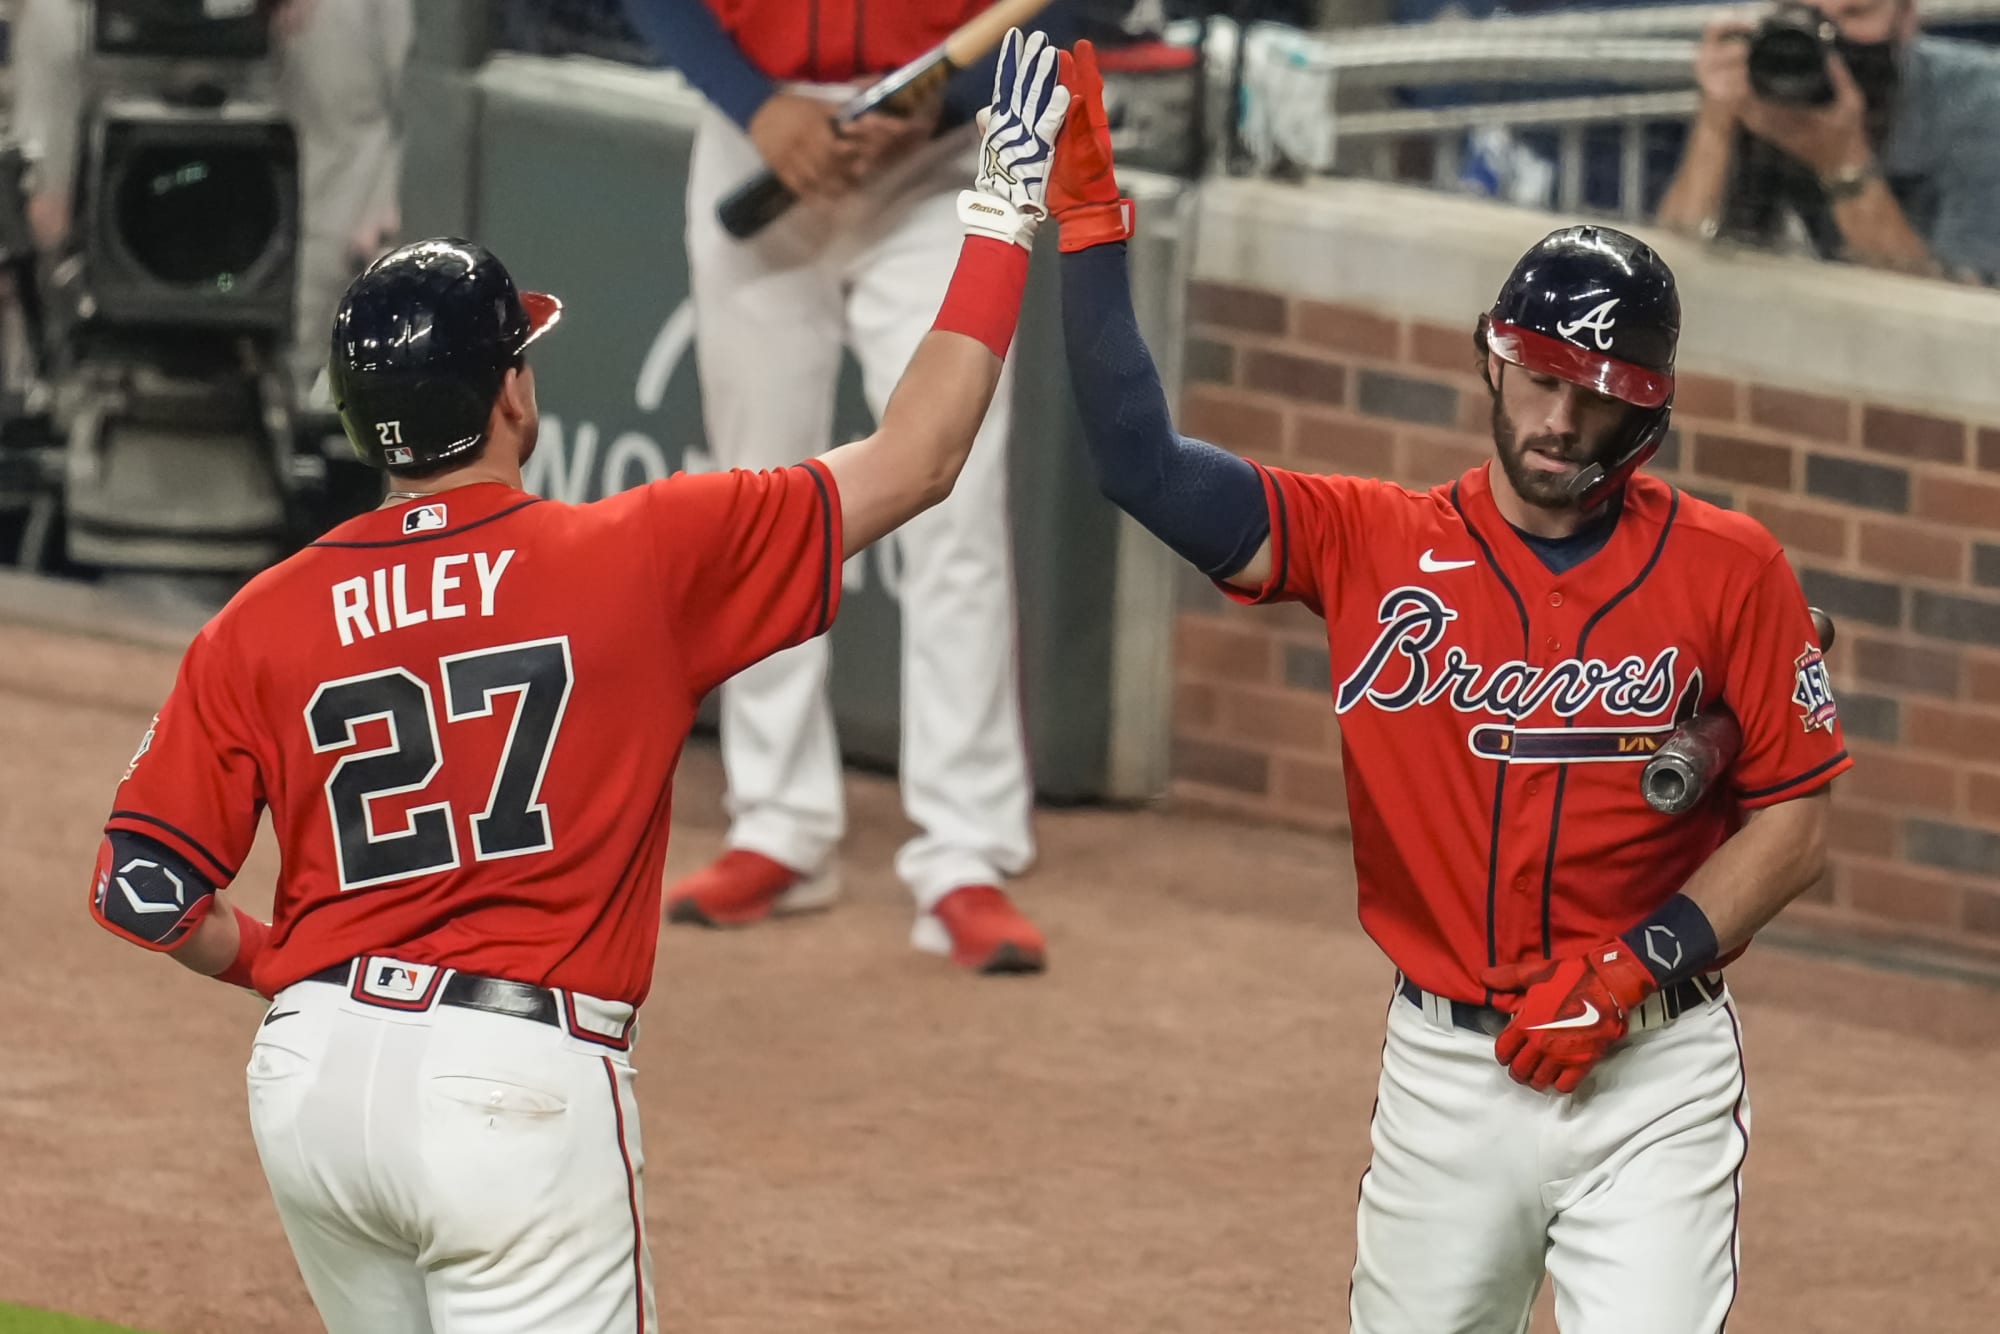 Braves set MLB record in absolute dismantling of Pirates pitching